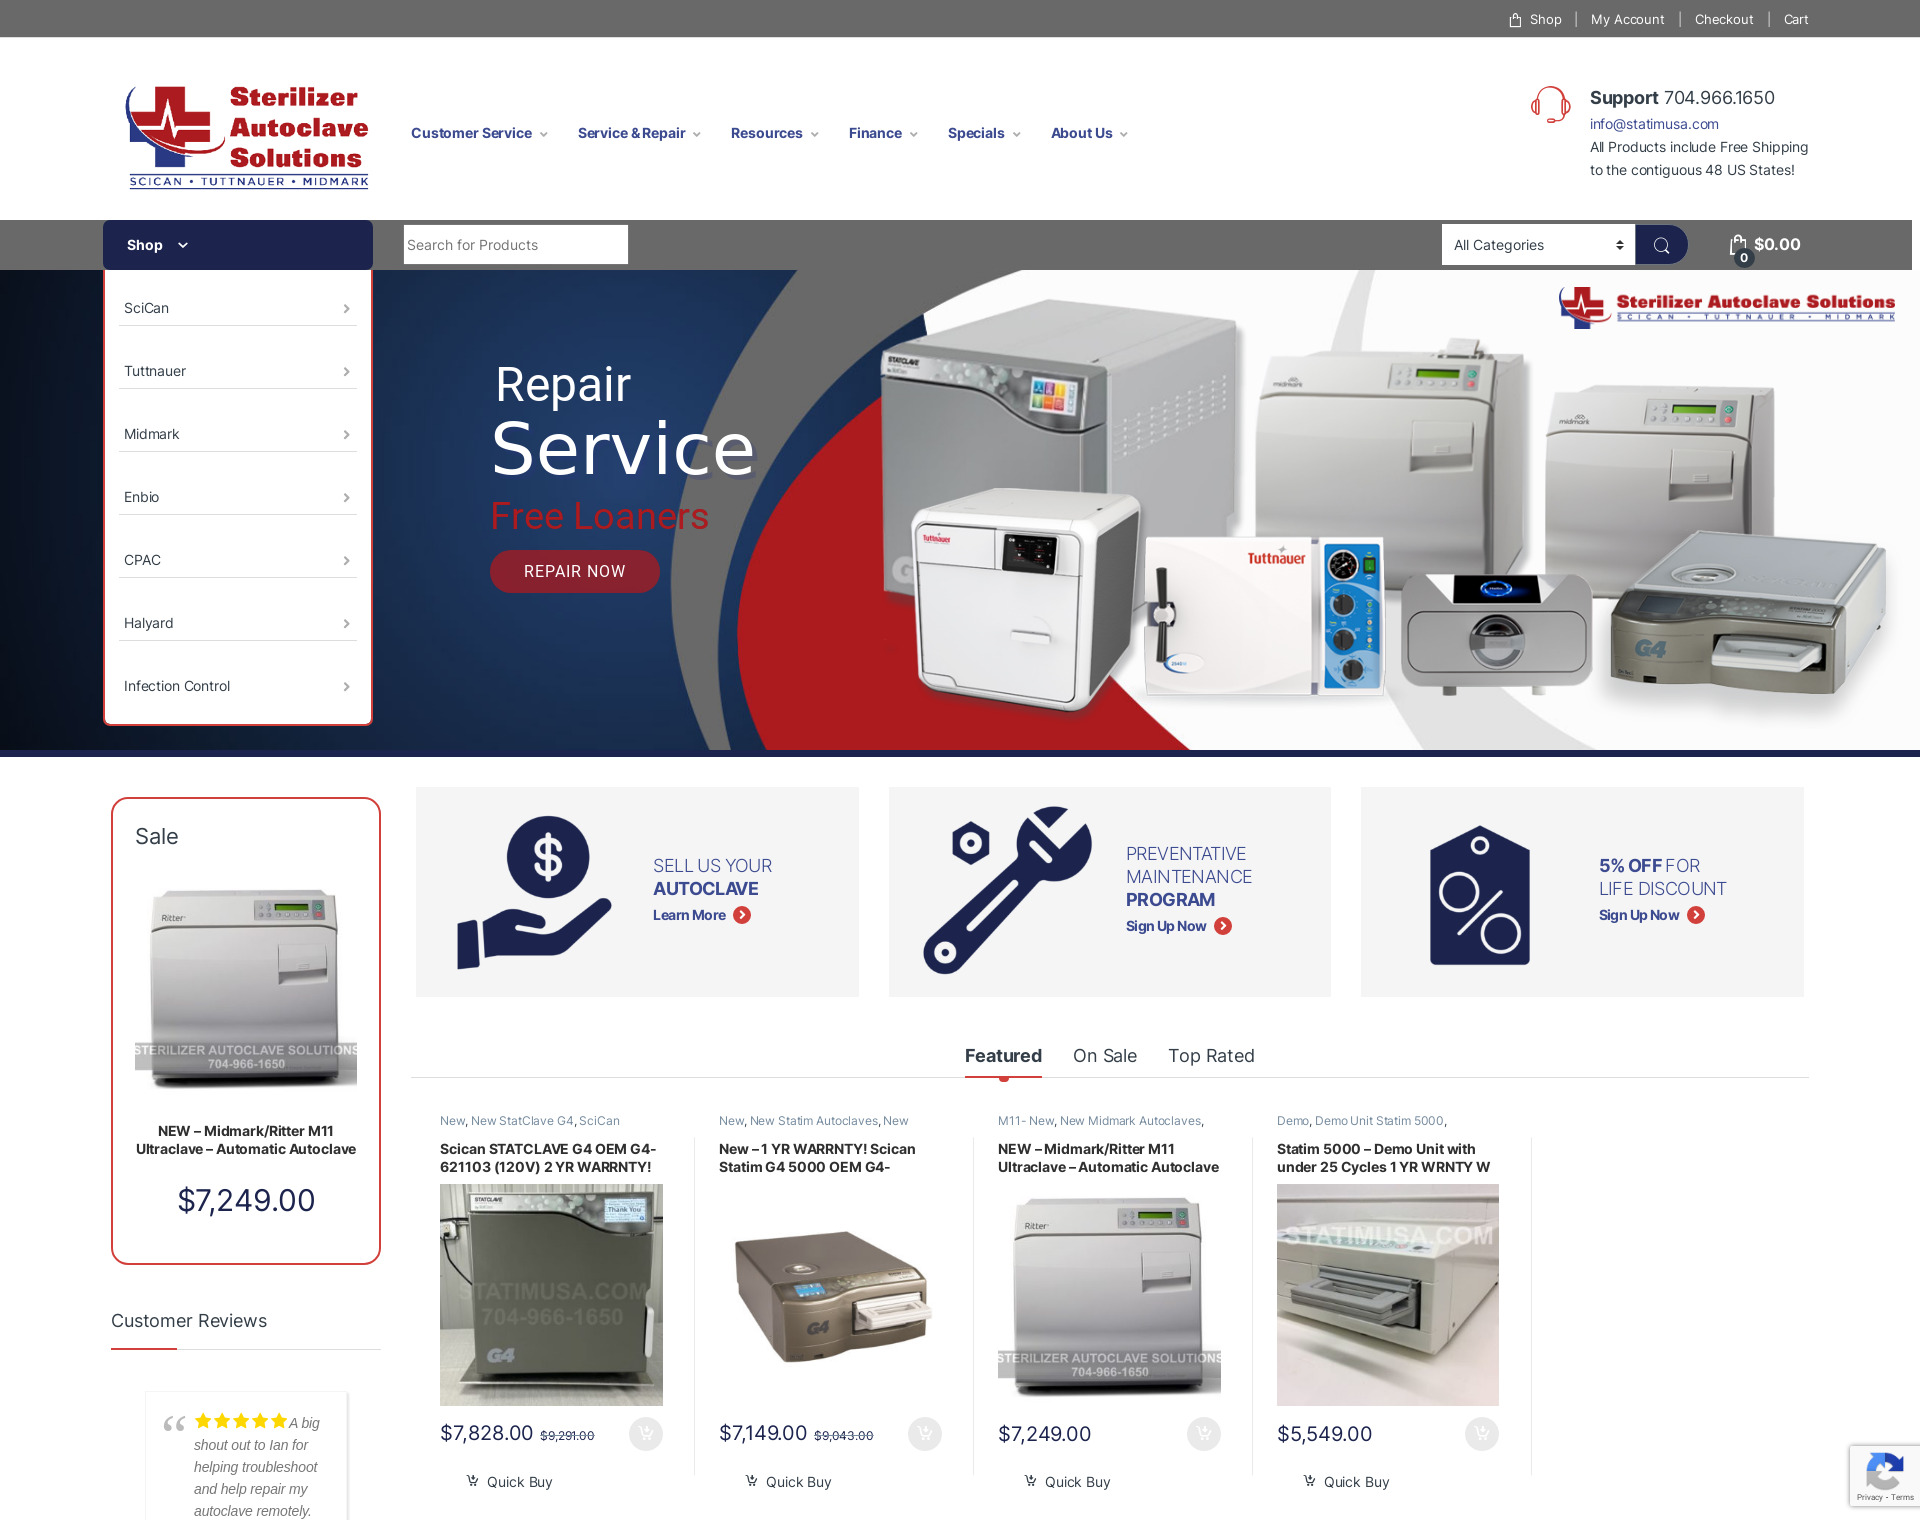 Sterilizer Autoclave Solutions by CCP Web Design in Charlotte NC